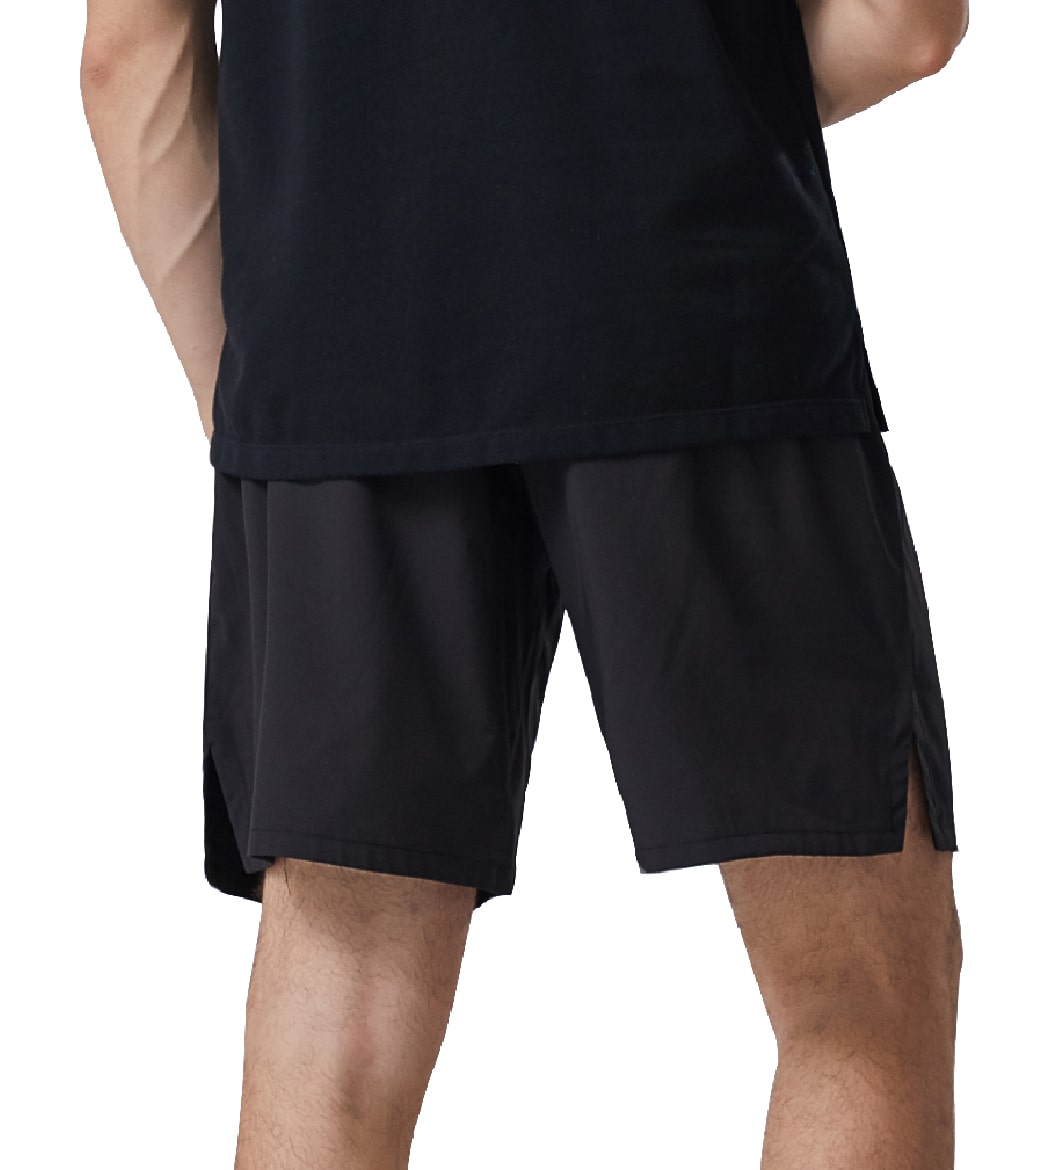 LOVESOFT Men's Quick-Dry Loose Casual & Running Active Shorts